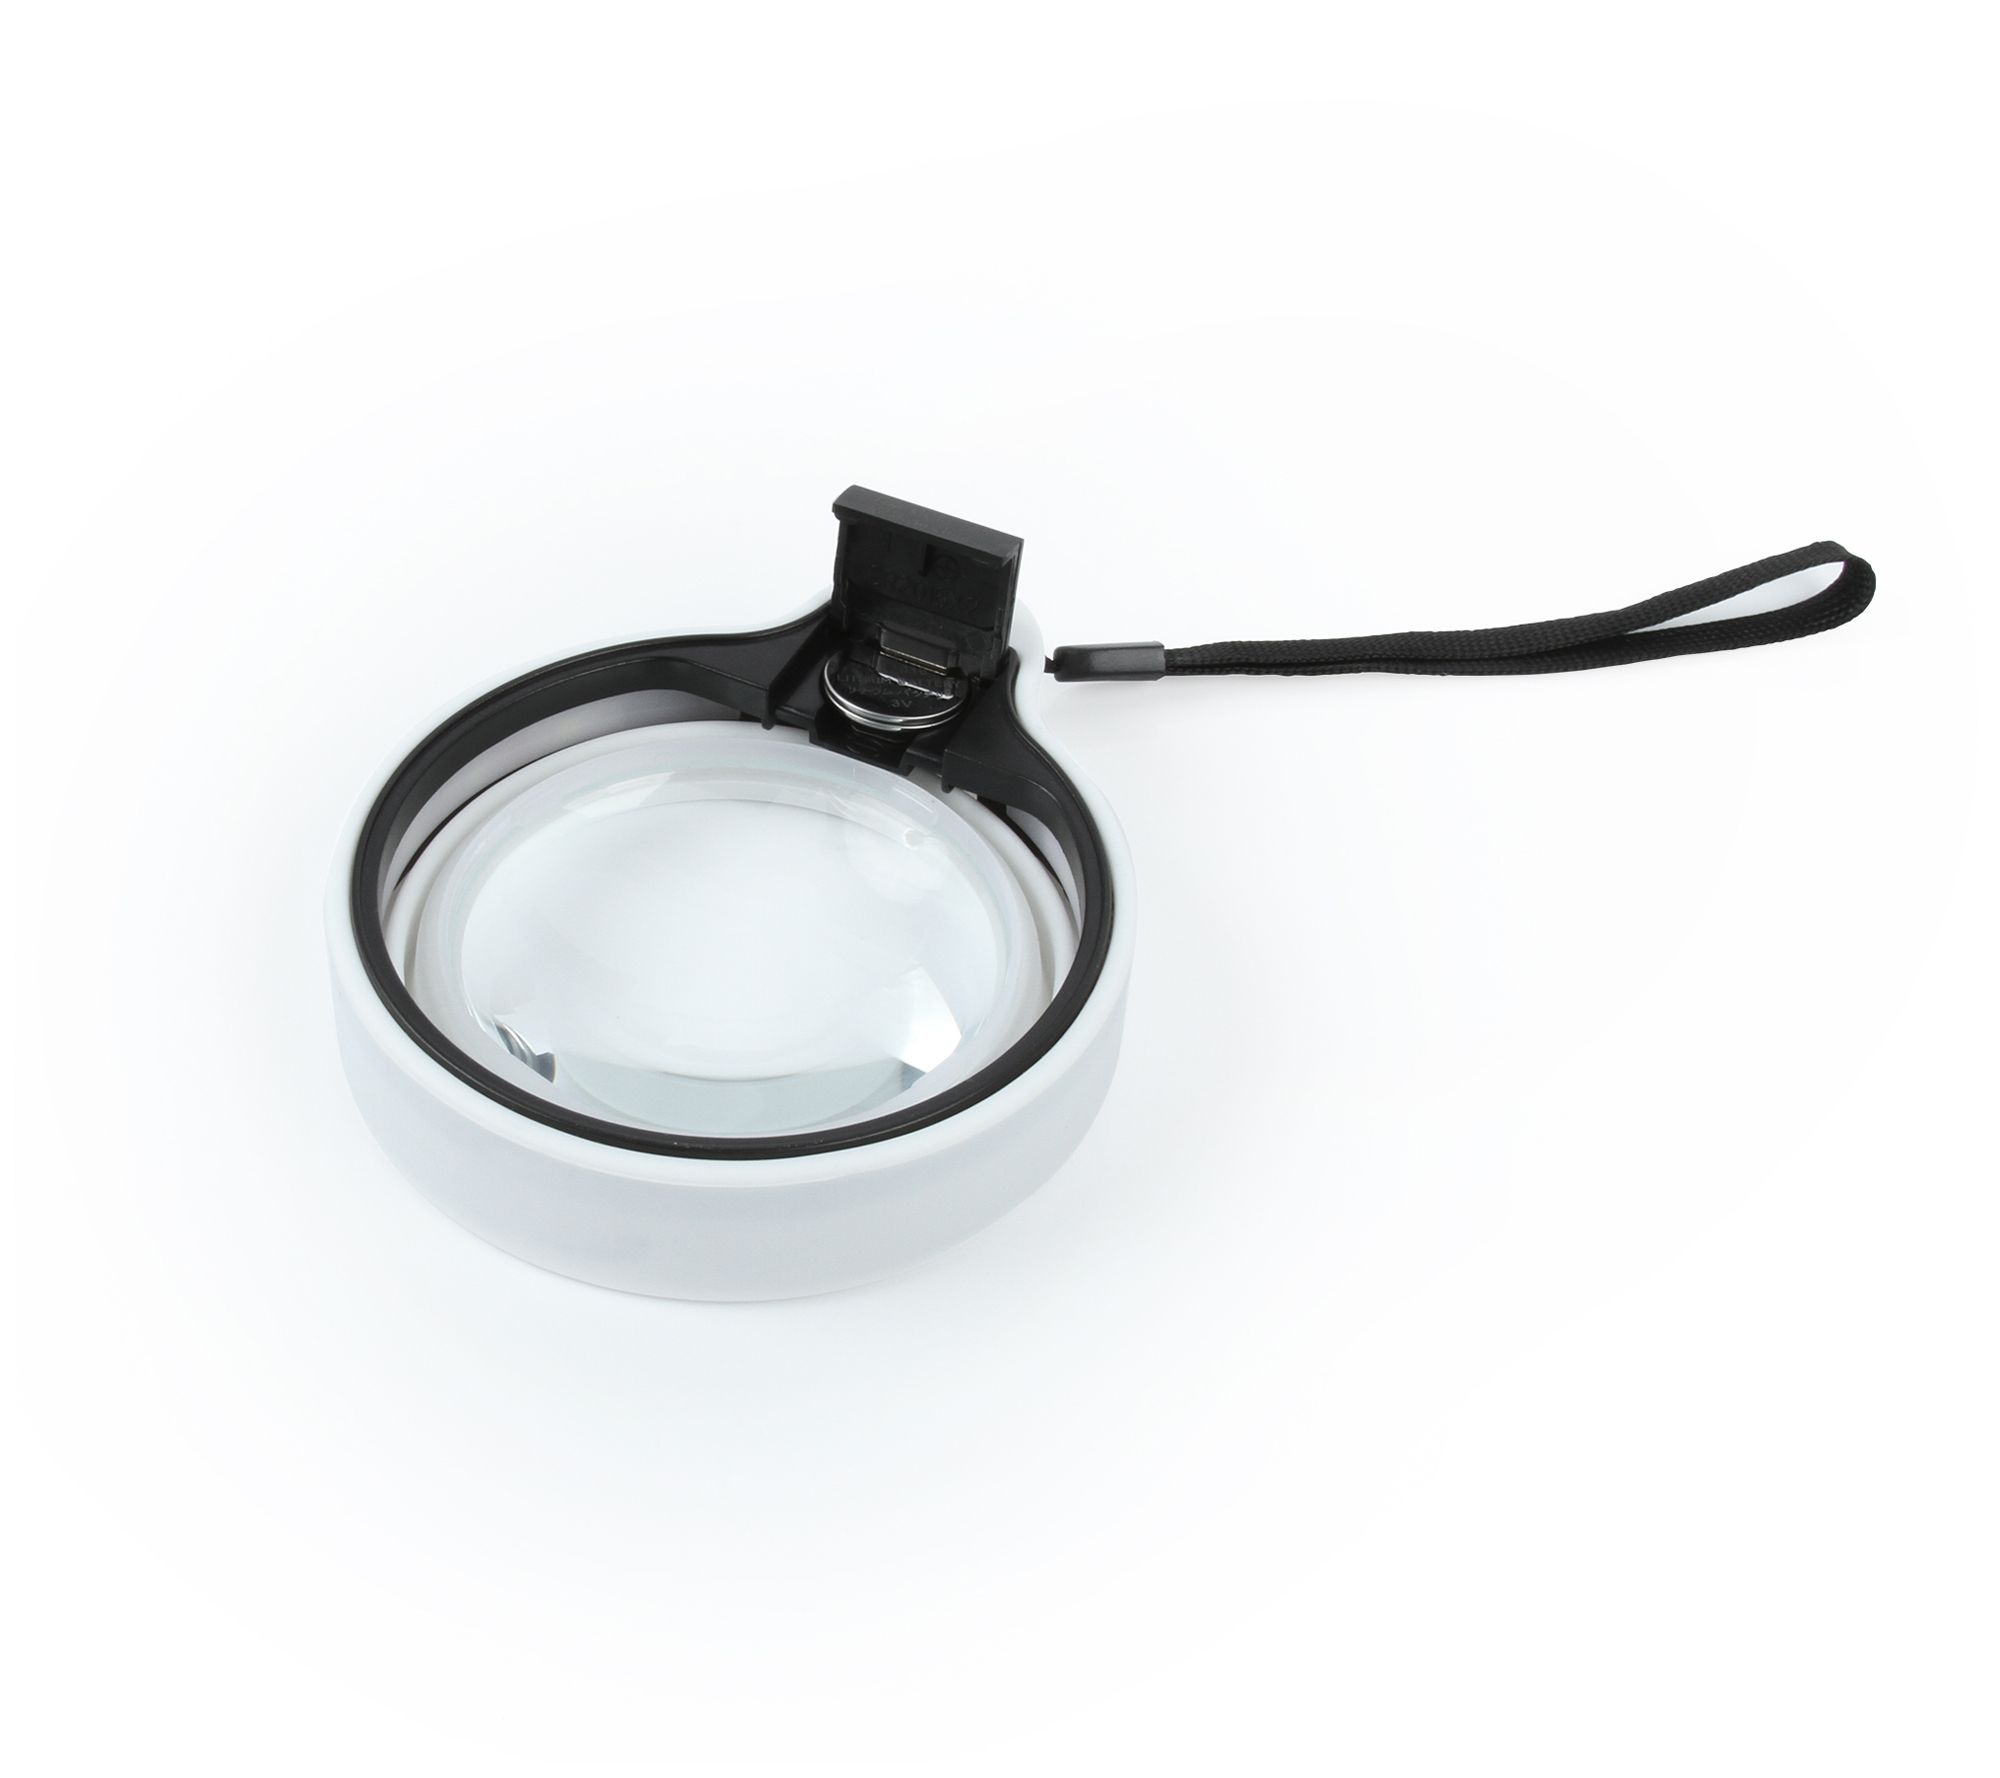 High Quality beauty salon magnifying glass with light For Varied